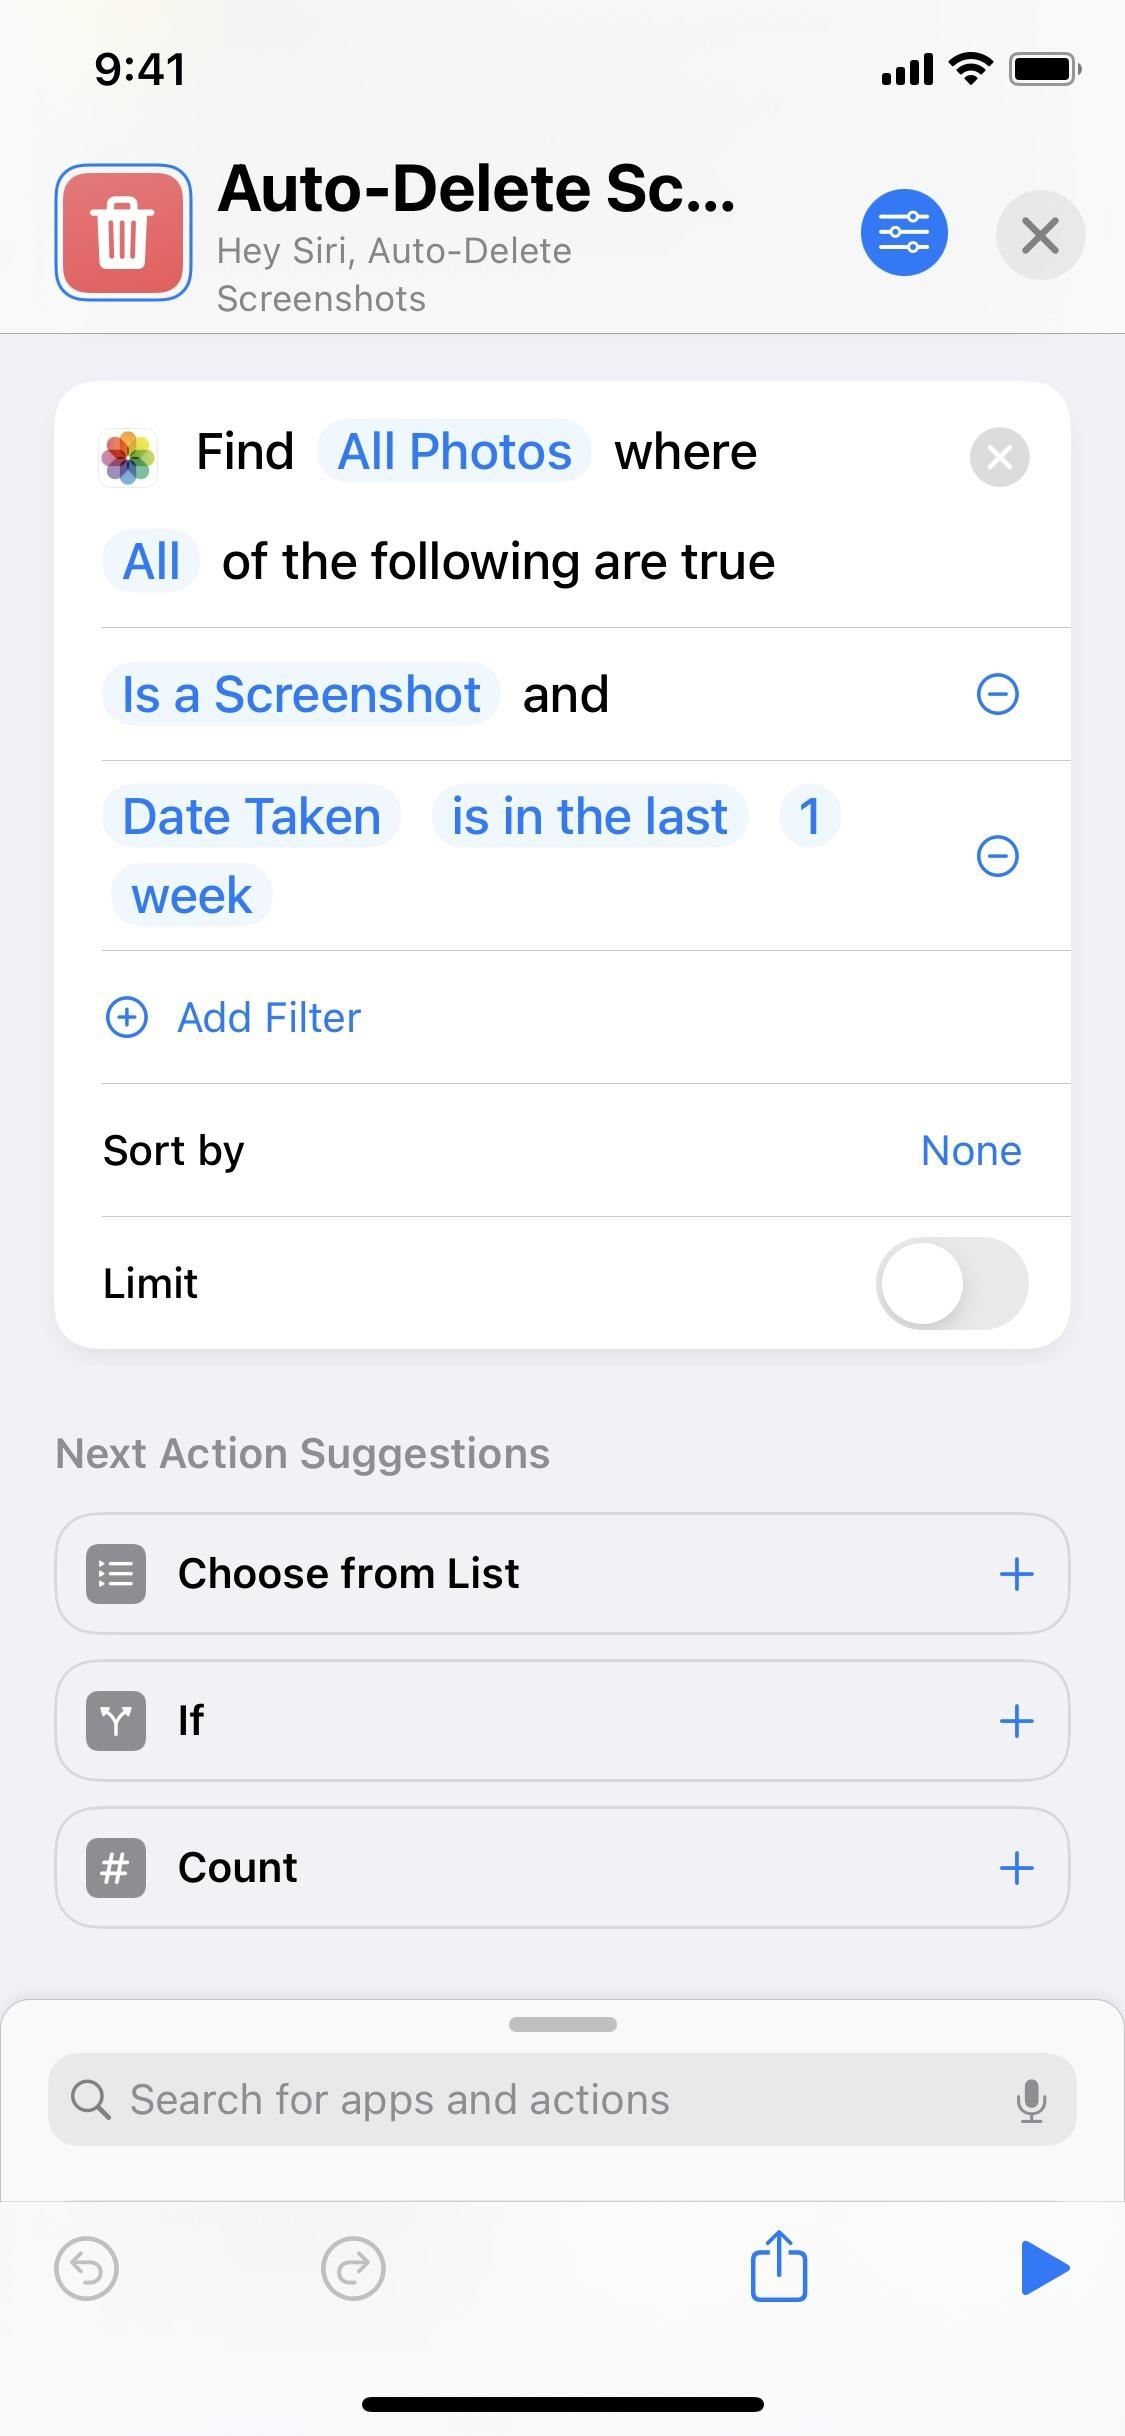 Make Your iPhone Delete Old Screenshots Automatically So Your Photos App Doesn't Become a Hot Mess